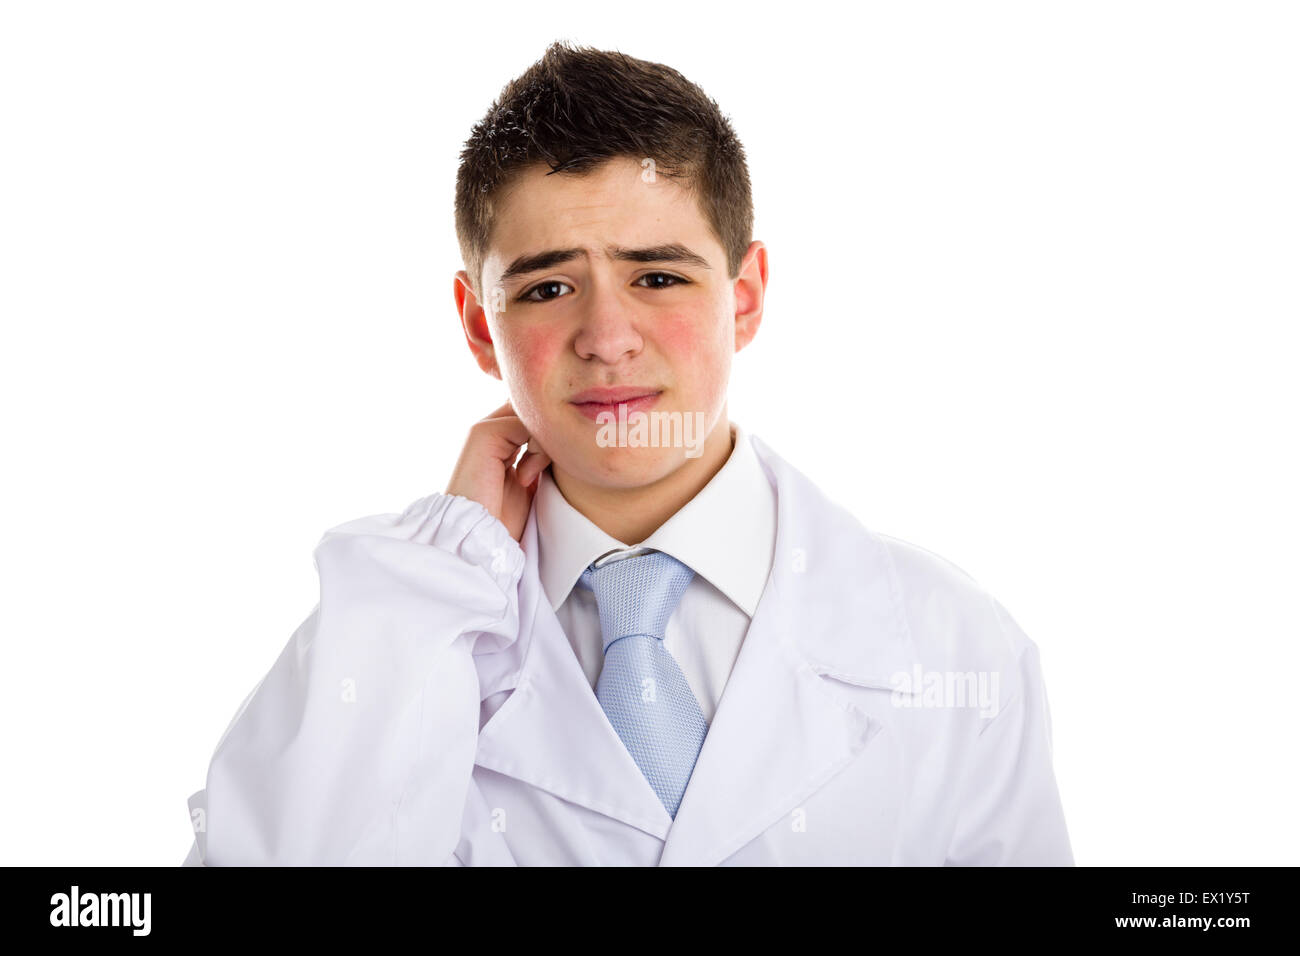 A boy doctor in white coat and blue tie helps to feel medicine more friendly: he is puzzled. His acne skin has not ben retouched Stock Photo